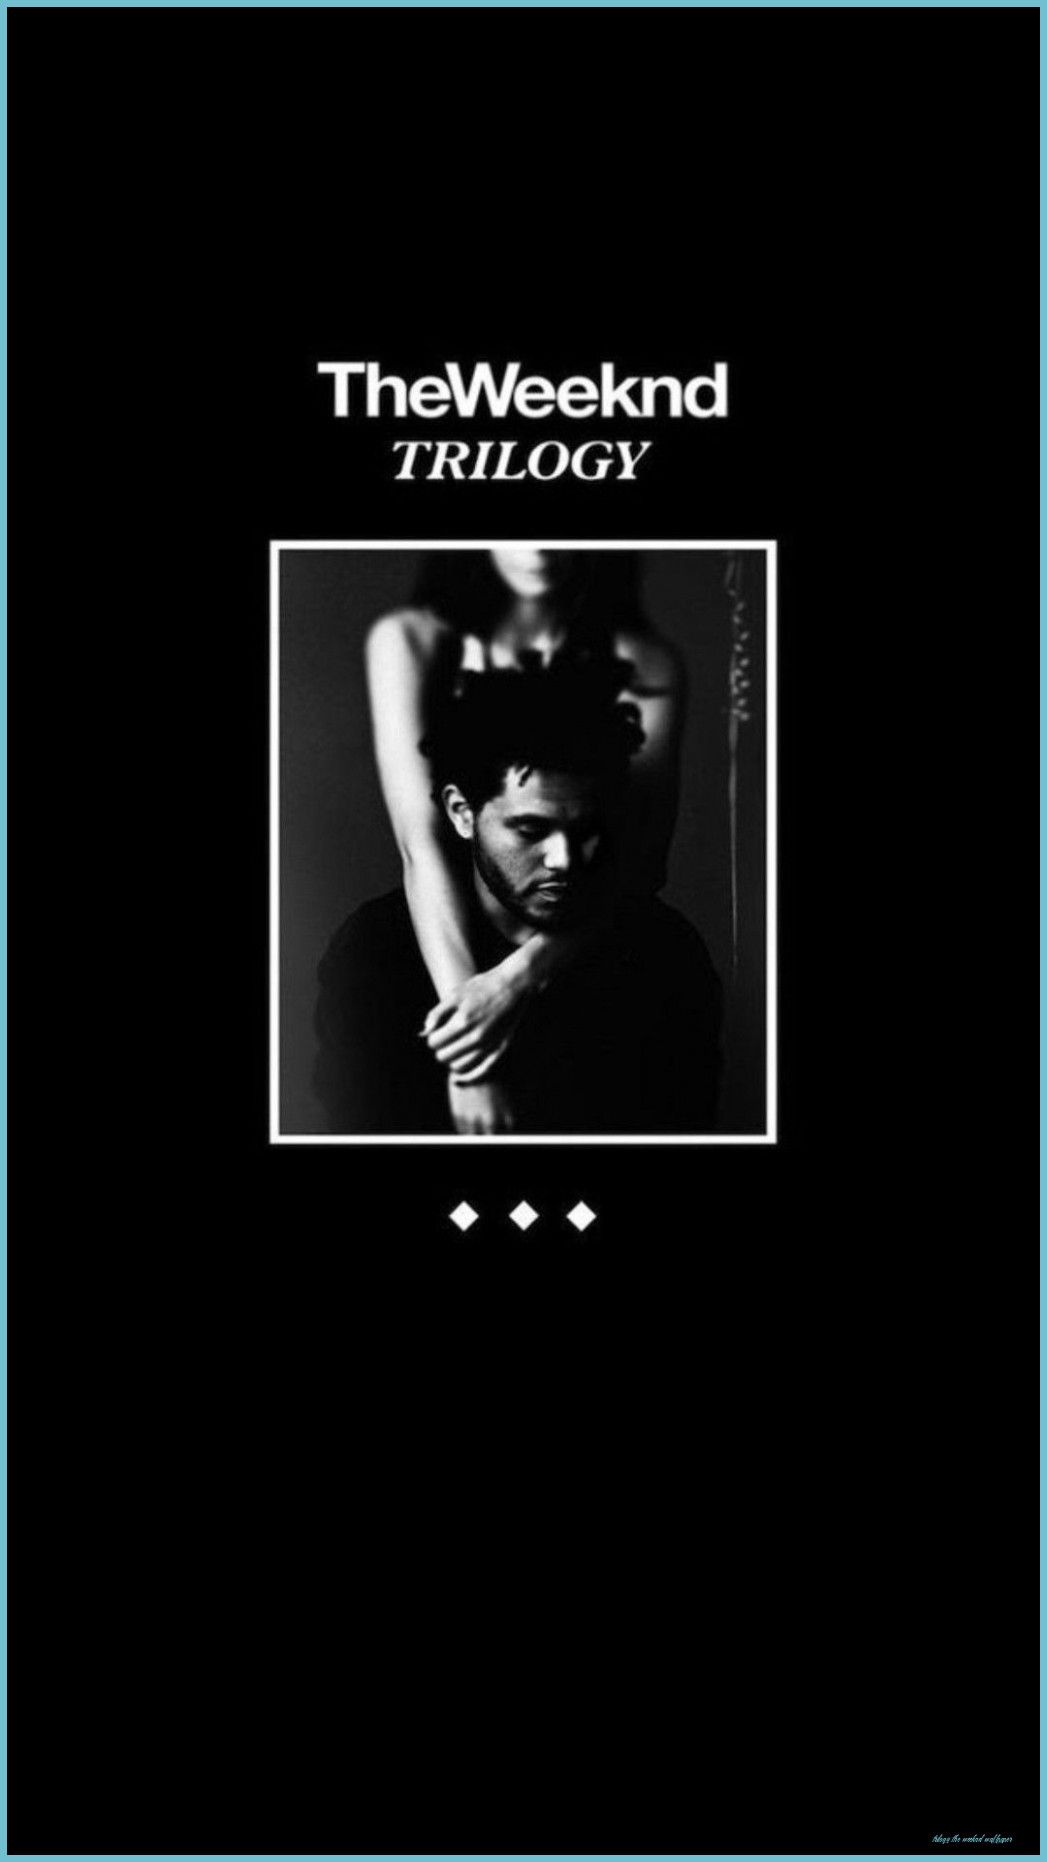 The weeknd wallpaper iphone 6 the weeknd trilogy album cover phone wallpaper phone backgrounds - The Weeknd